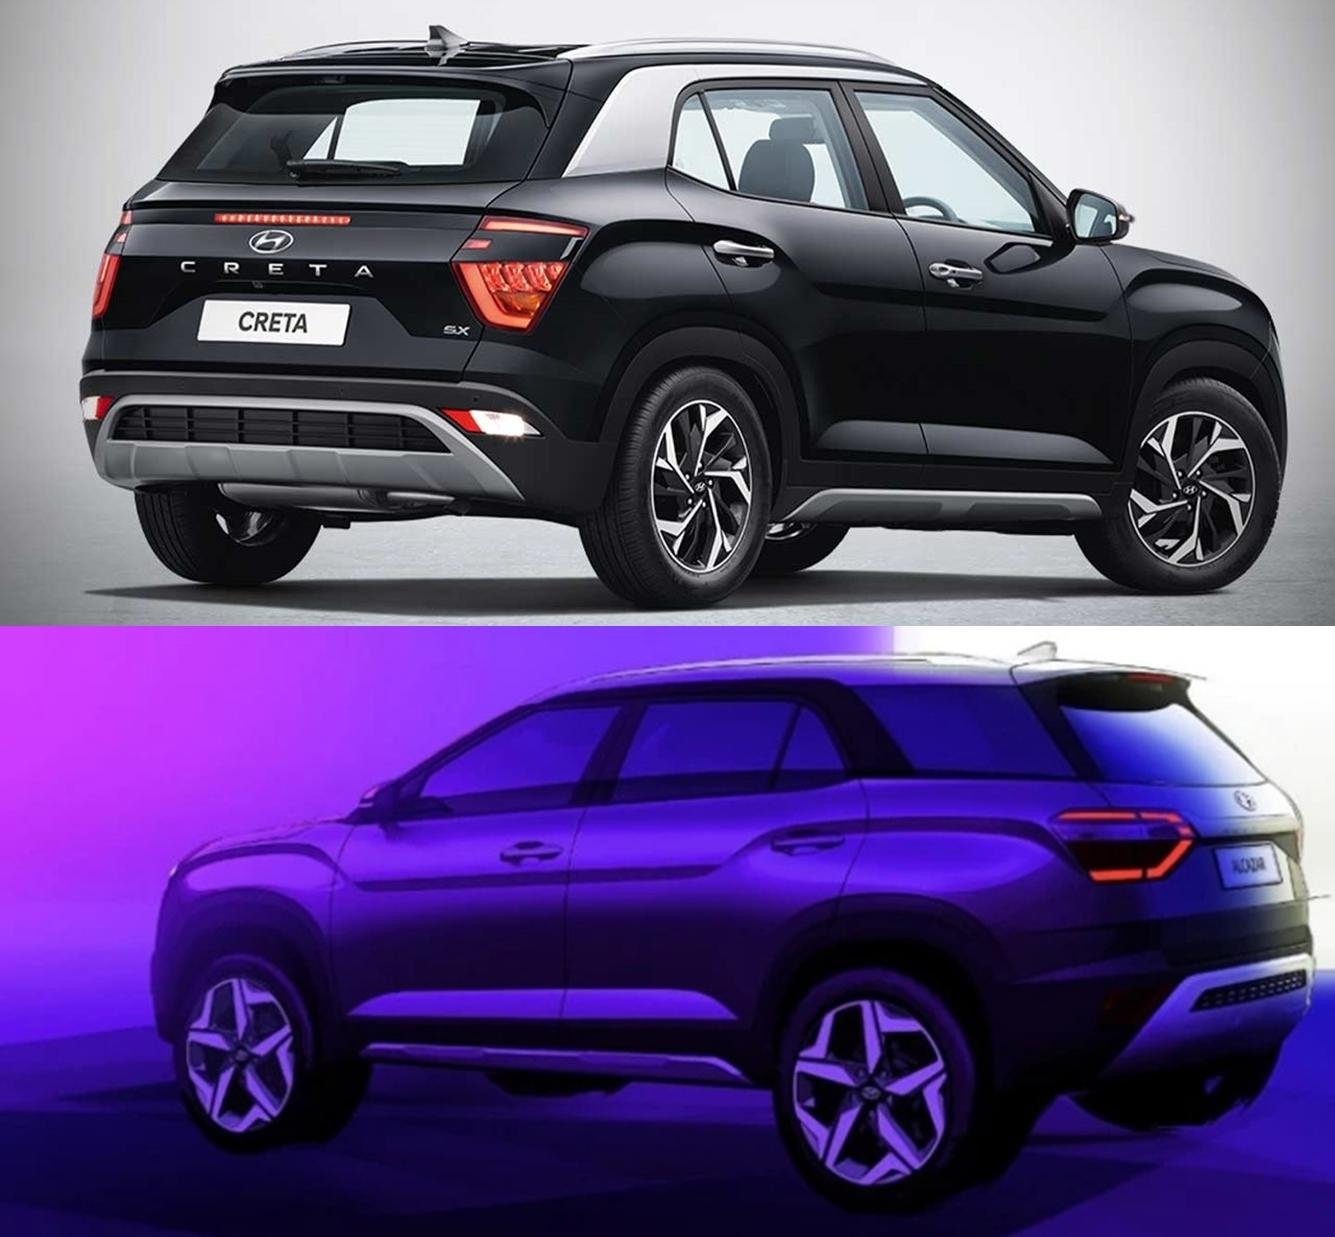 Here Are The Top 5 Differences Between The Hyundai Alcazar And The Creta